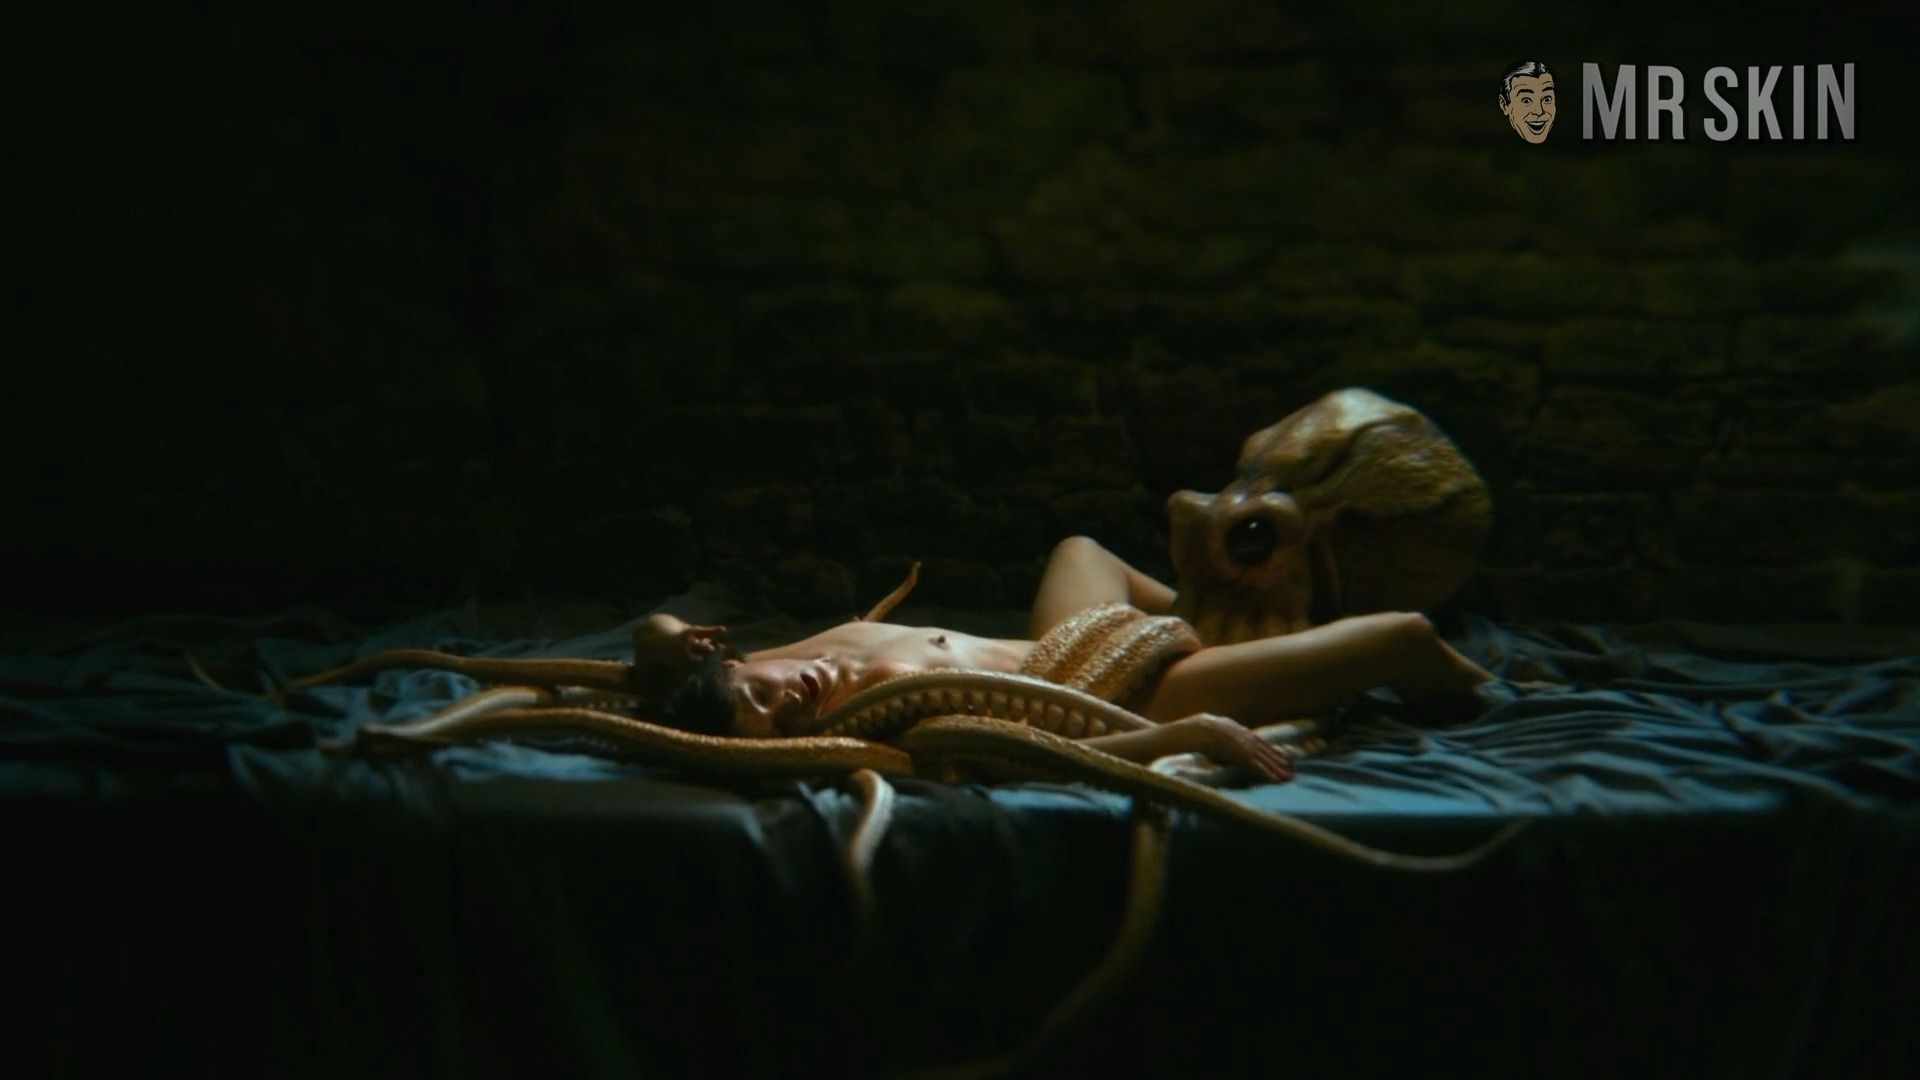 Margot Robbie Lesbian Kiss Tentacle Monster Sex And More At Mr Skin